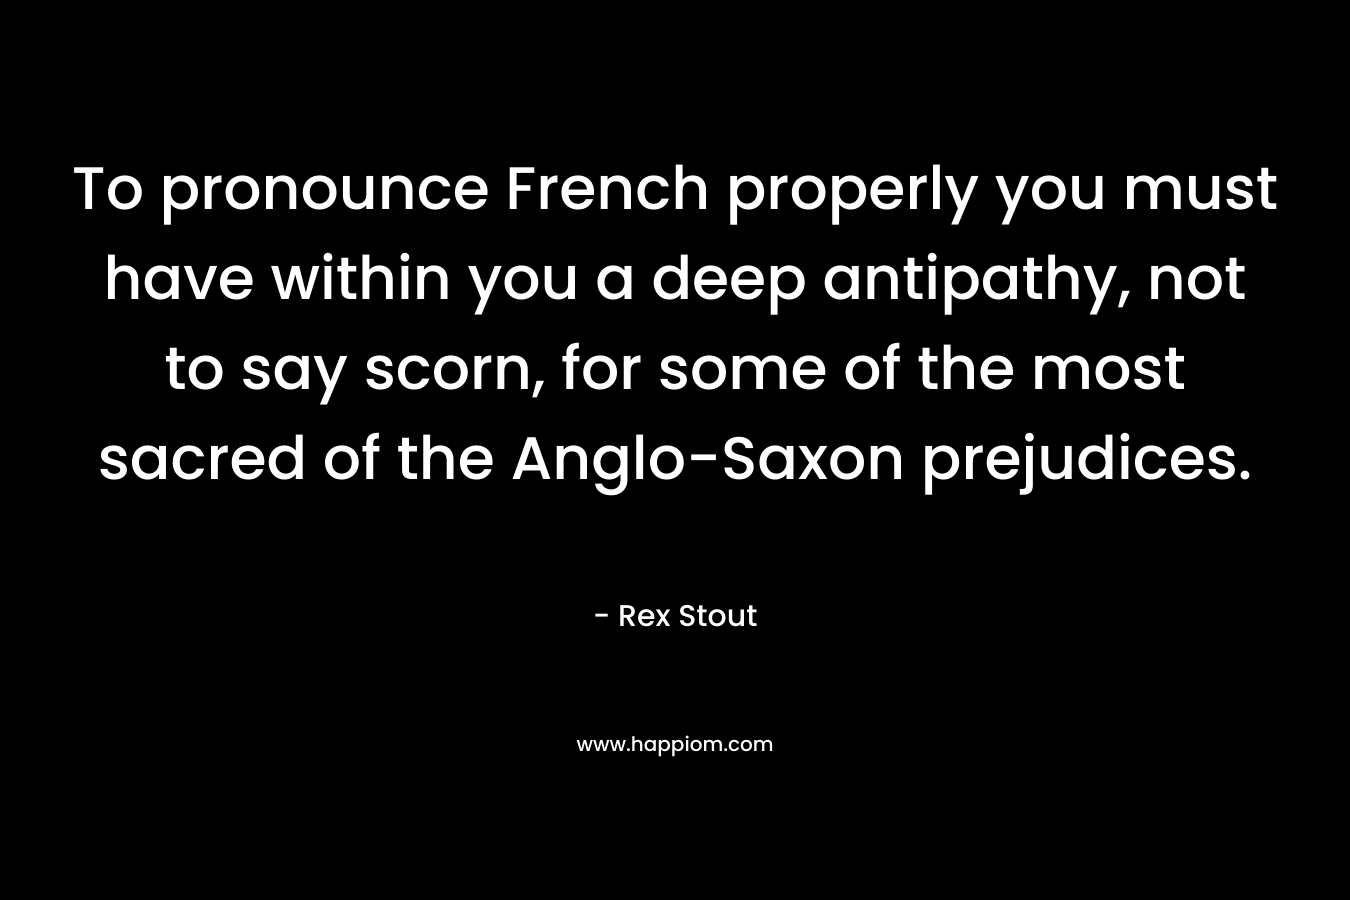 To pronounce French properly you must have within you a deep antipathy, not to say scorn, for some of the most sacred of the Anglo-Saxon prejudices. – Rex Stout